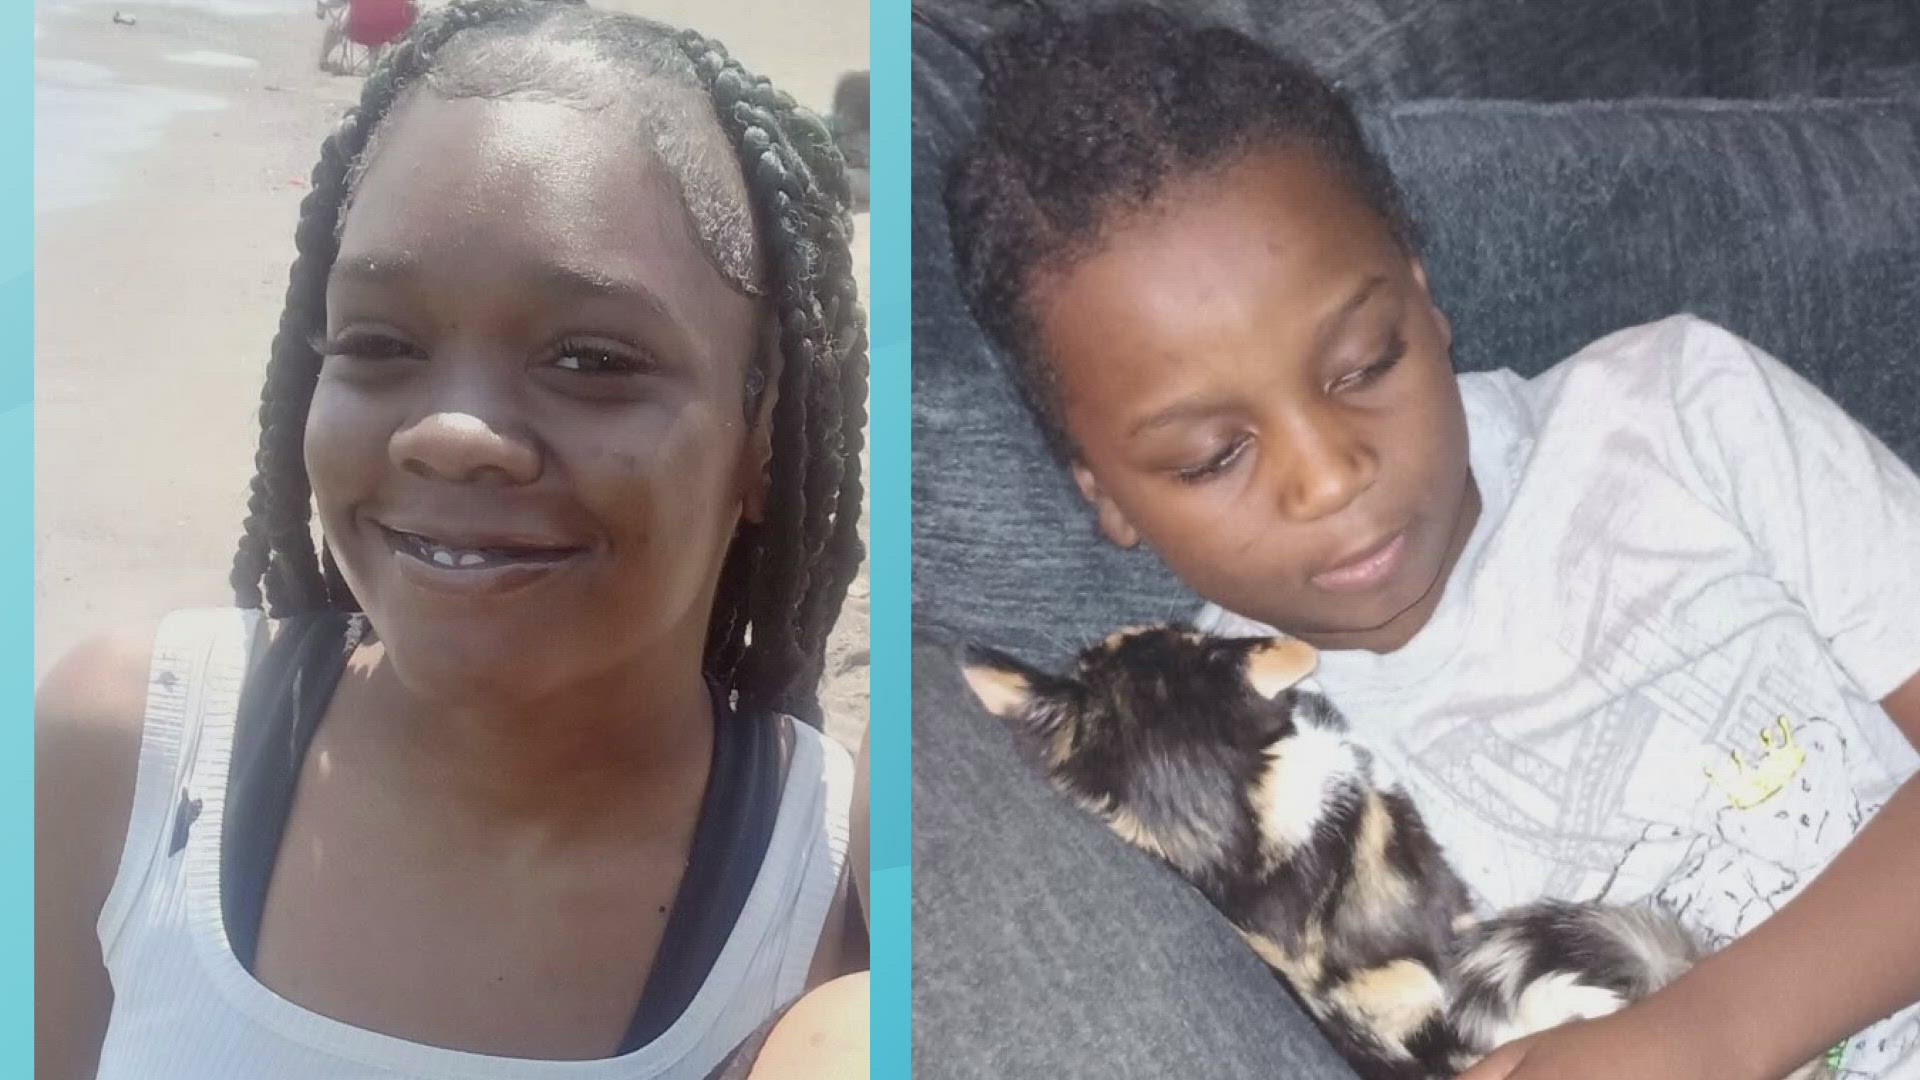 16-year-old Iana McCrary and 9-year-old Daeshon Whalen died when the car they were in was rear-ended by a garbage truck.